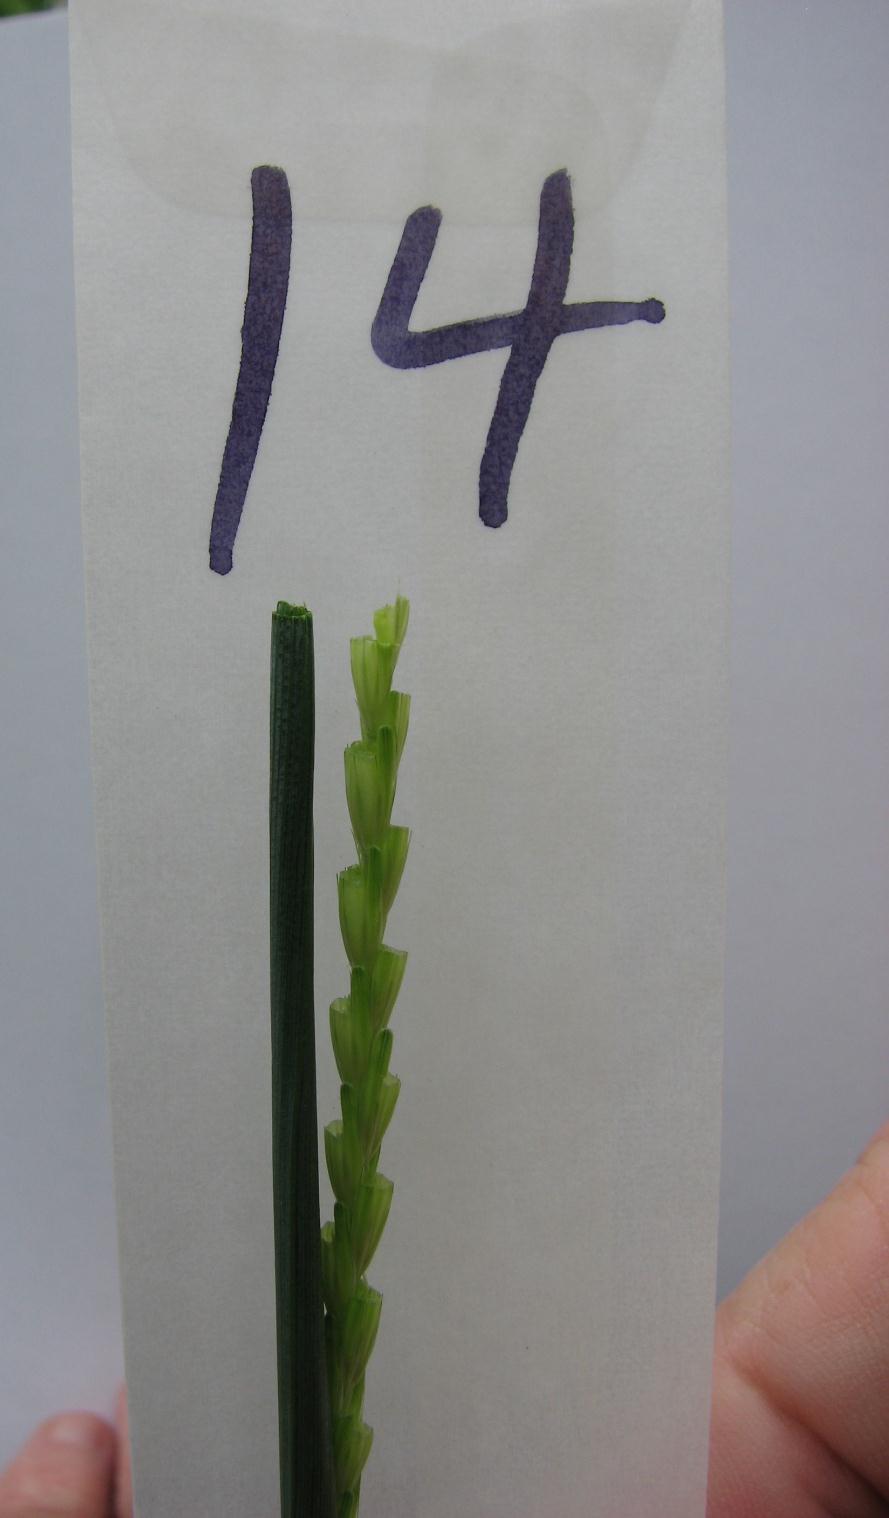 After emasculation of the female spike has been completed, place it in a numbered glassine bag. The number on the glassine bag indicates the day the emasculation was made.